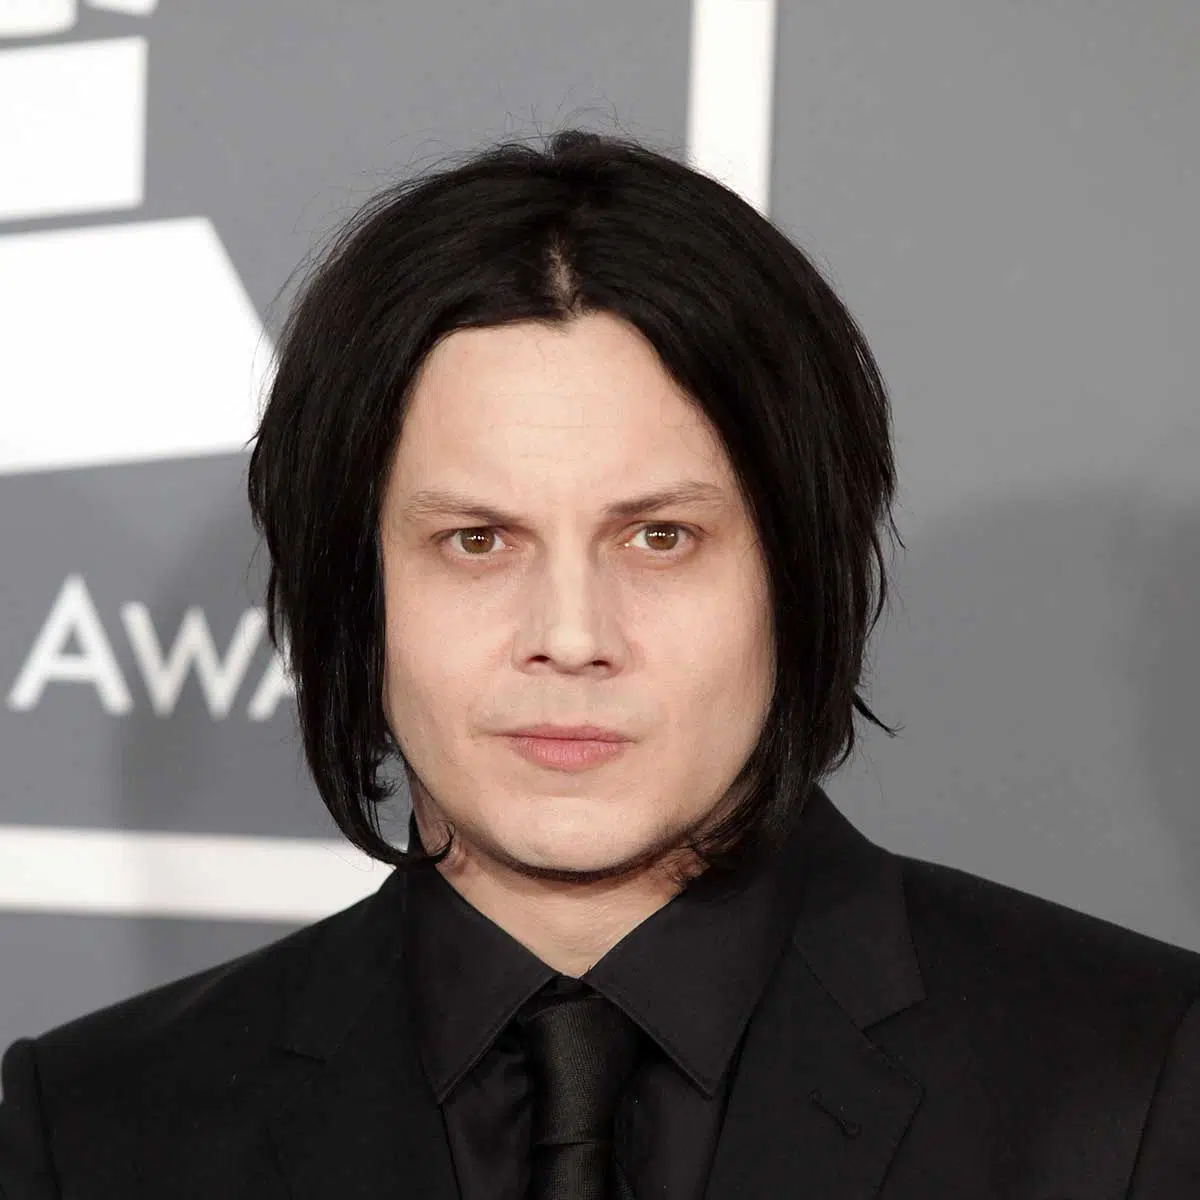 Jack White Slams "Hypocritical Sellouts" Mark Wahlberg and Guy Fieri